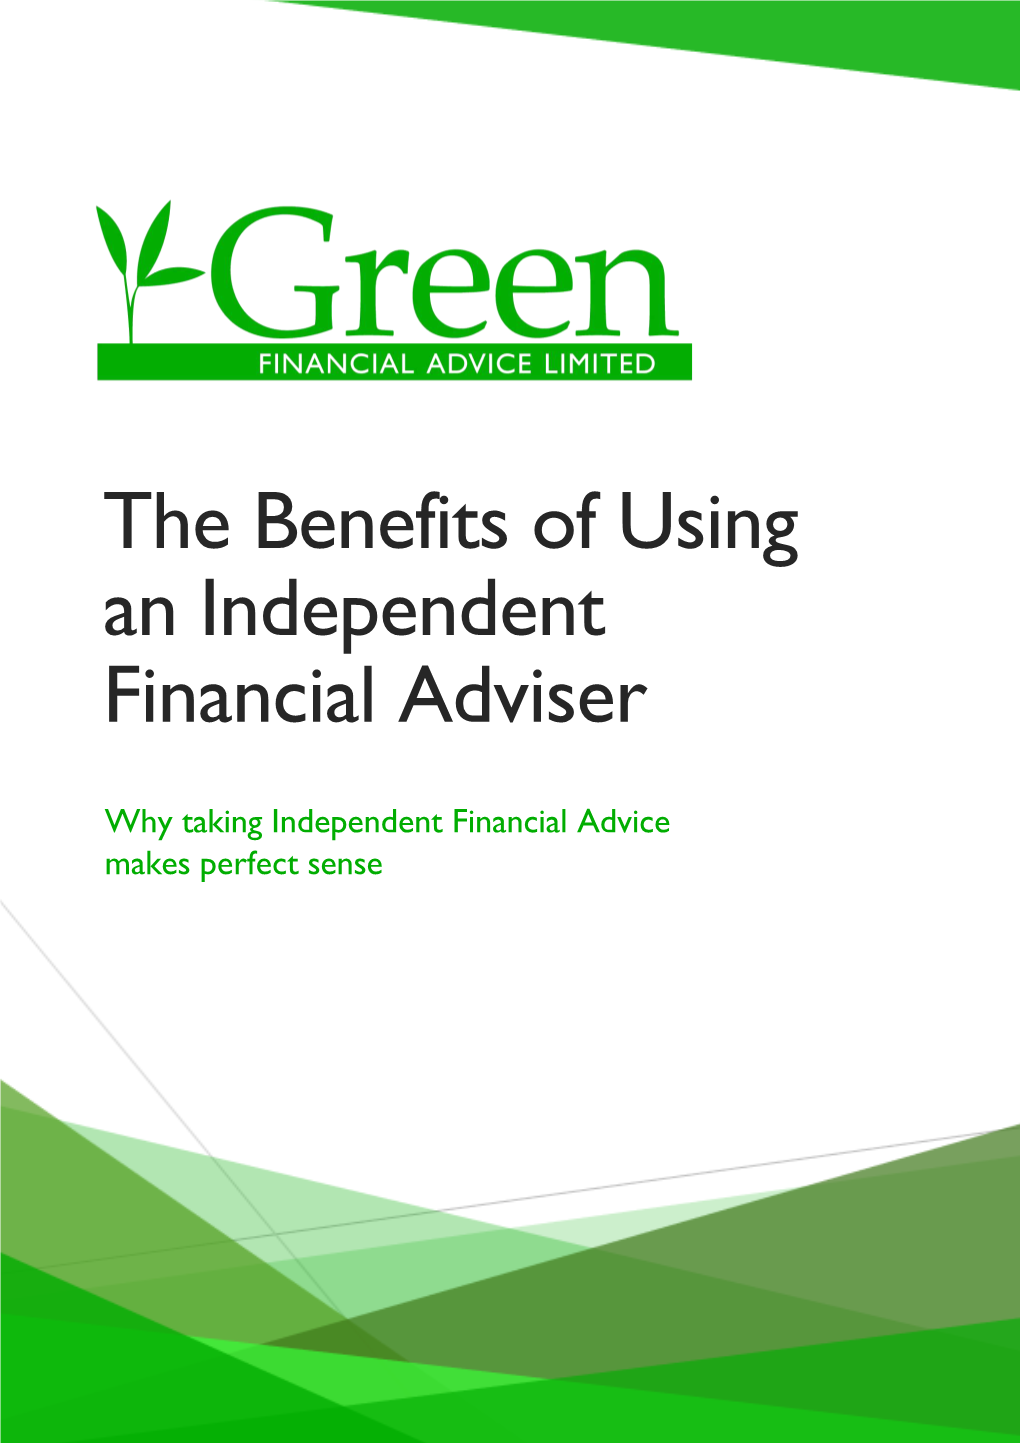 The Benefits of Using an Independent Financial Adviser